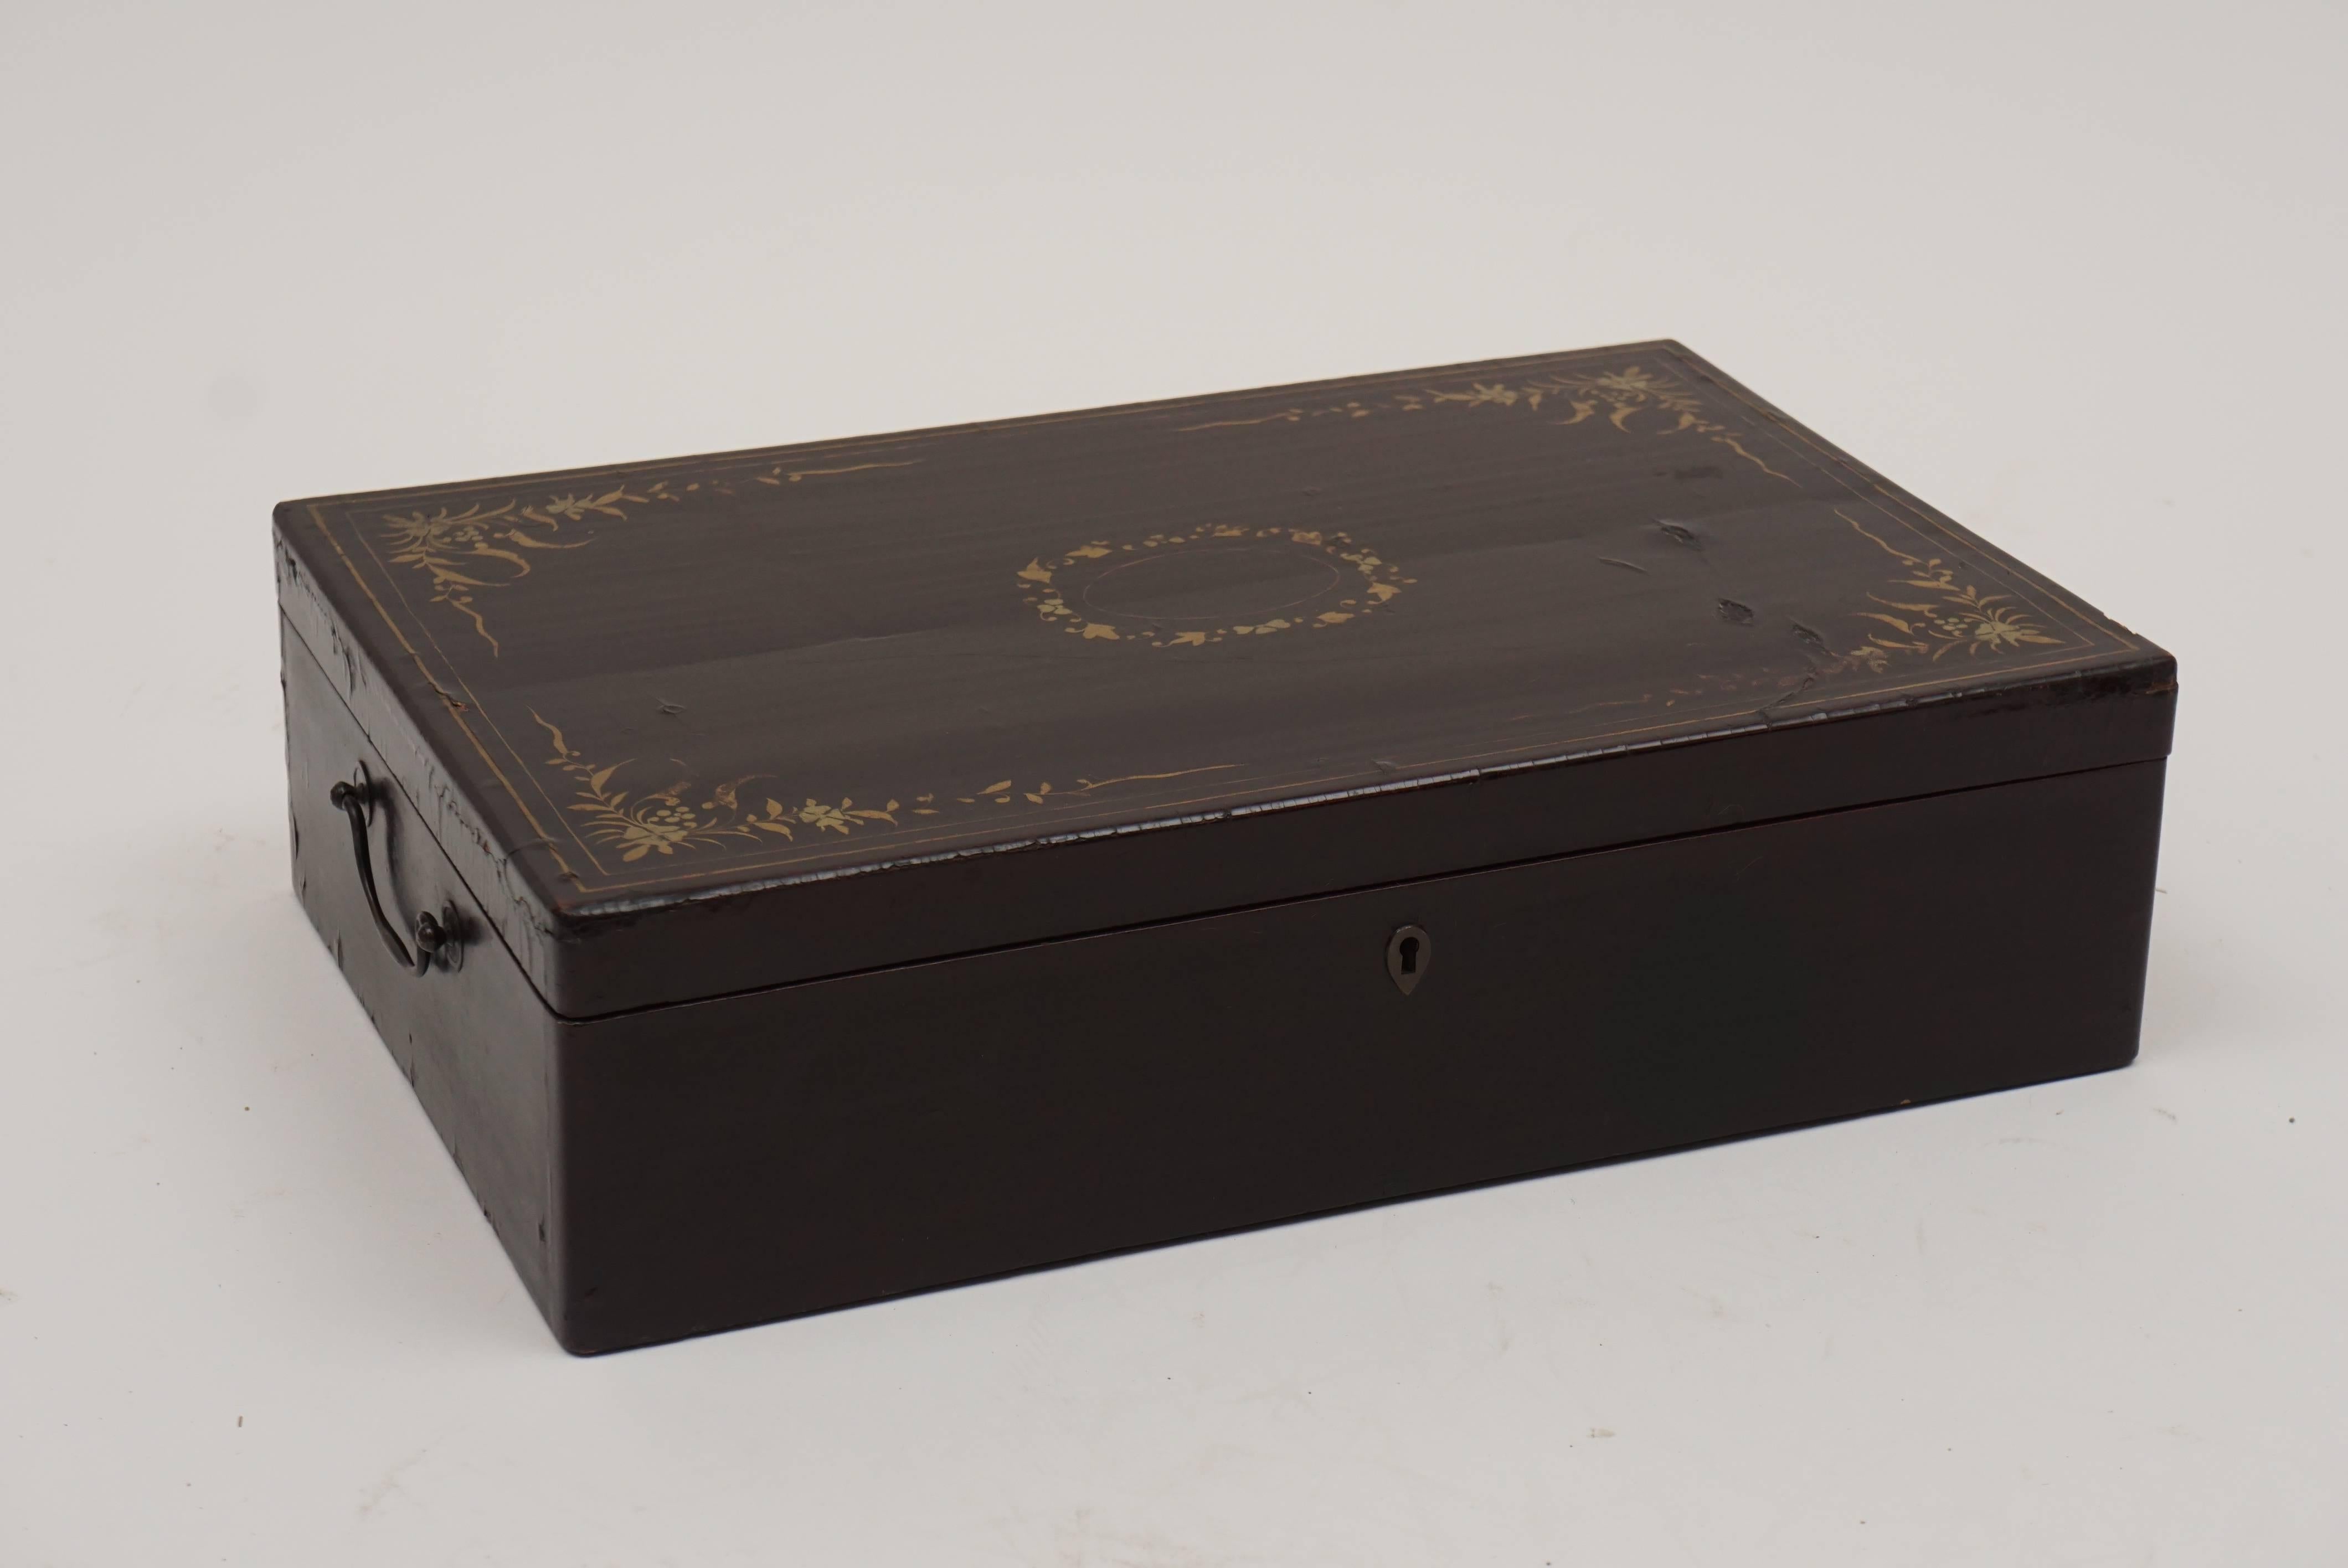 Late 18th-early 19th century Chinese export lacquer box. Made for European markets. Gold embellishments of swags and flowers decorate the lid of the box. Keyhole, but no key. Metal handles at either end of box to facilitate carrying. Small area on